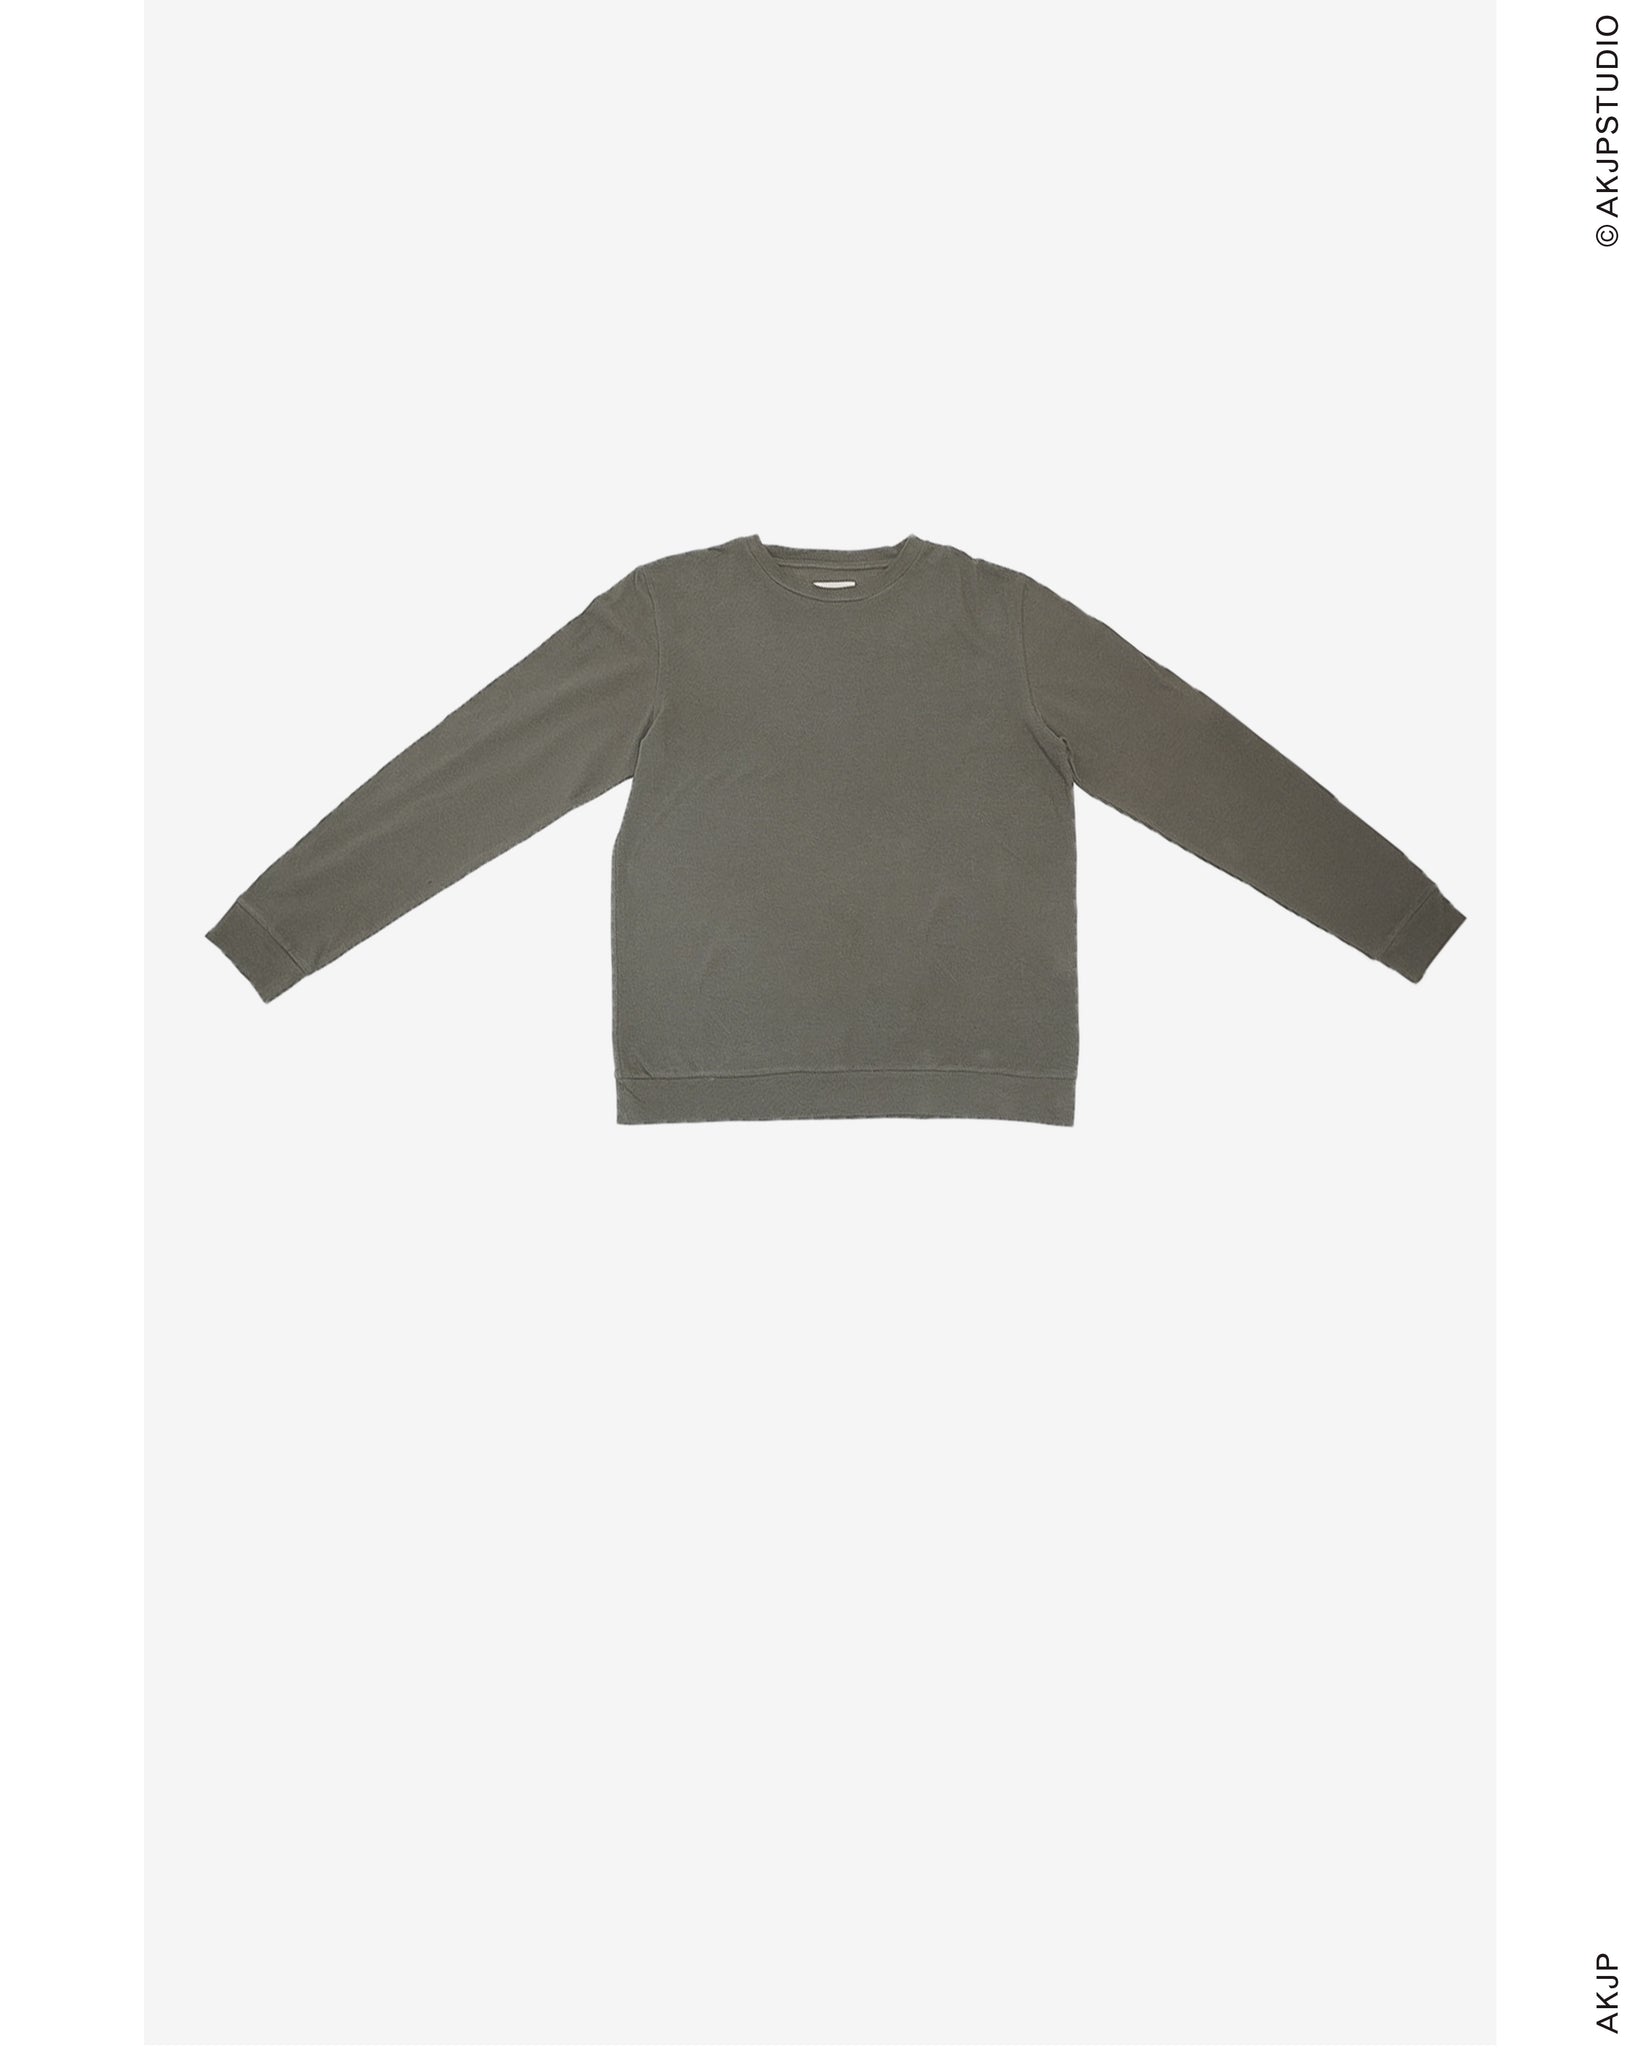 Tennis T (Long Sleeve) olive